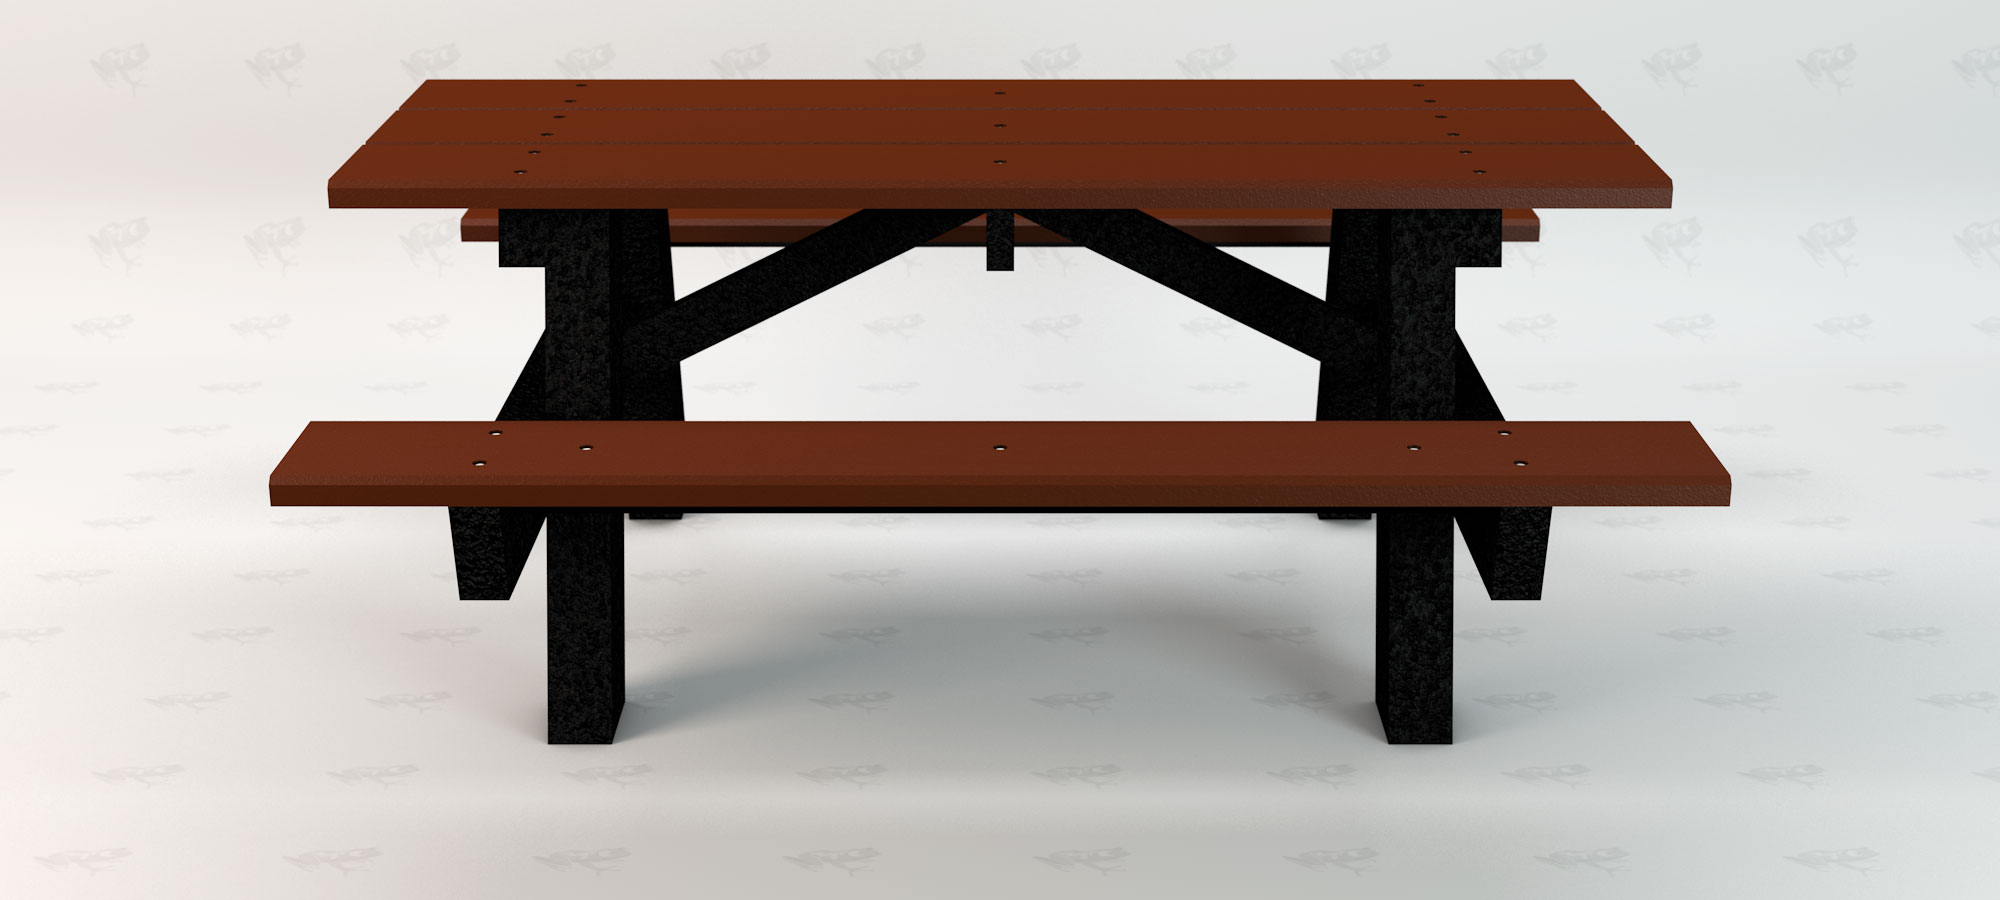 A Frame Table Front